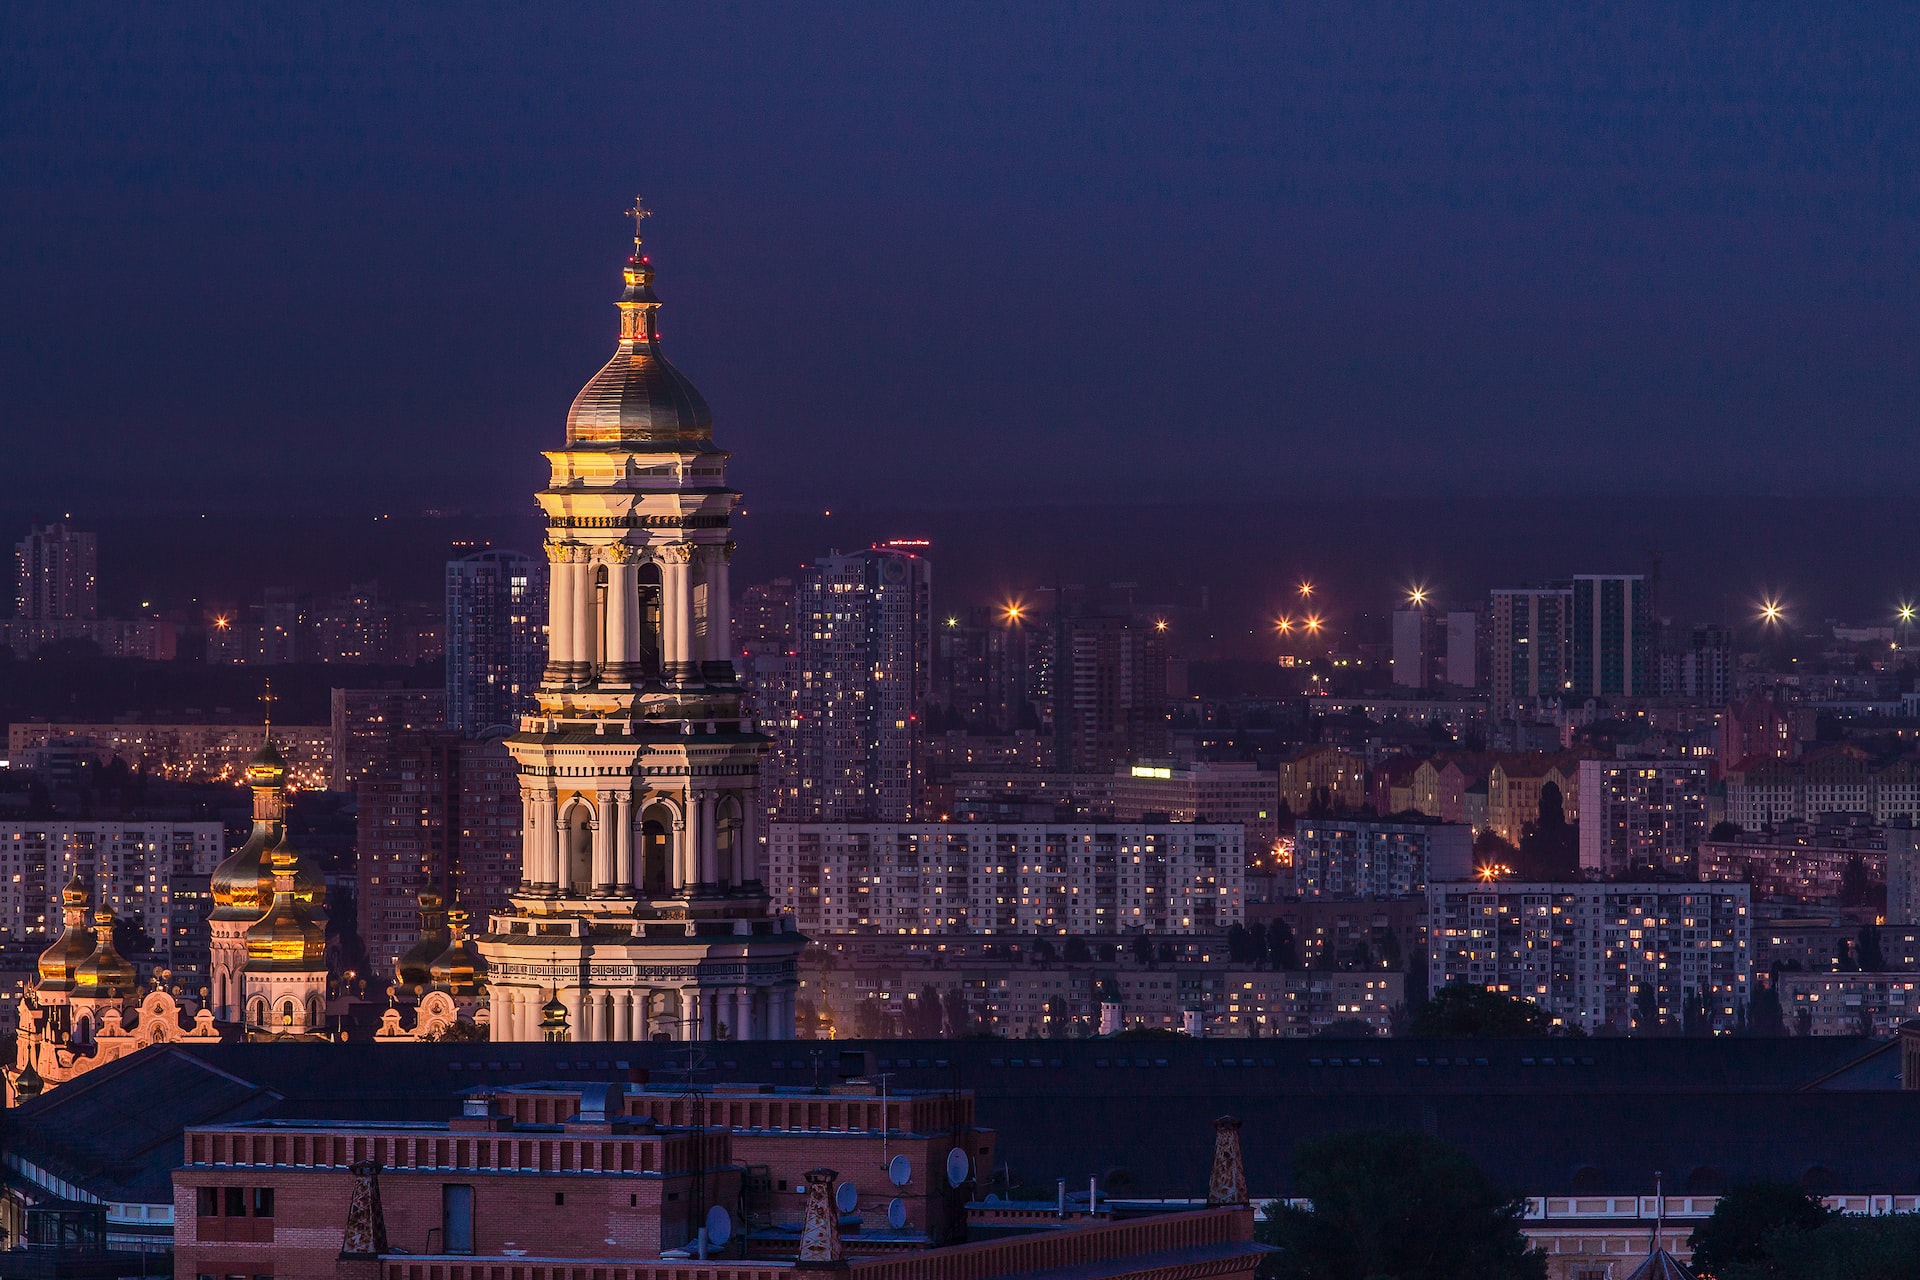 Why did the name of Ukraine’s capital change from Kiev to Kyiv?